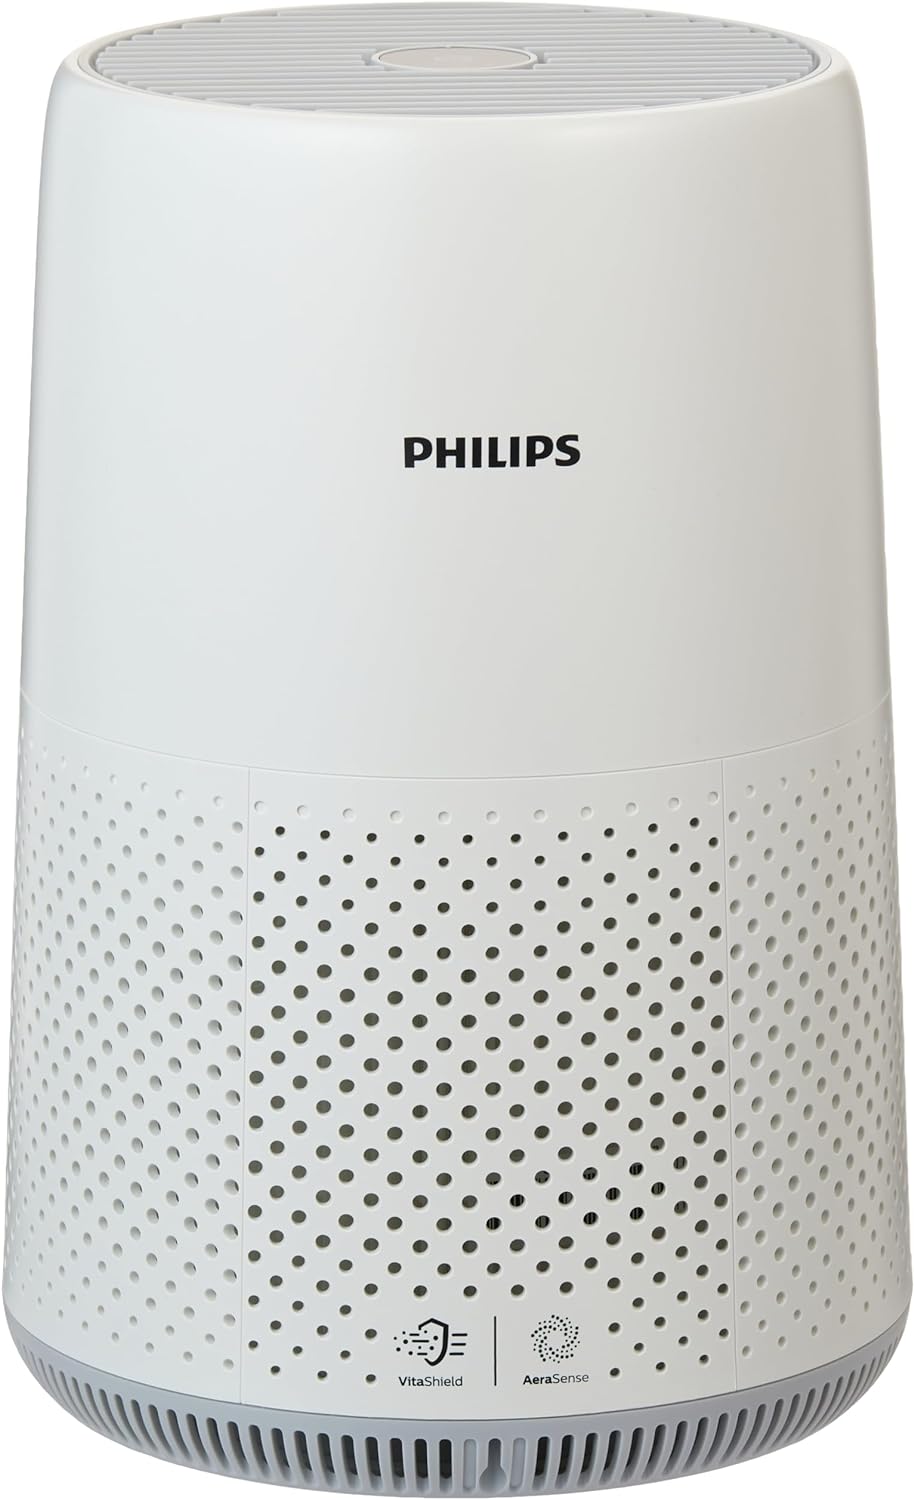 Philips Compact Air Purifier 800 Series